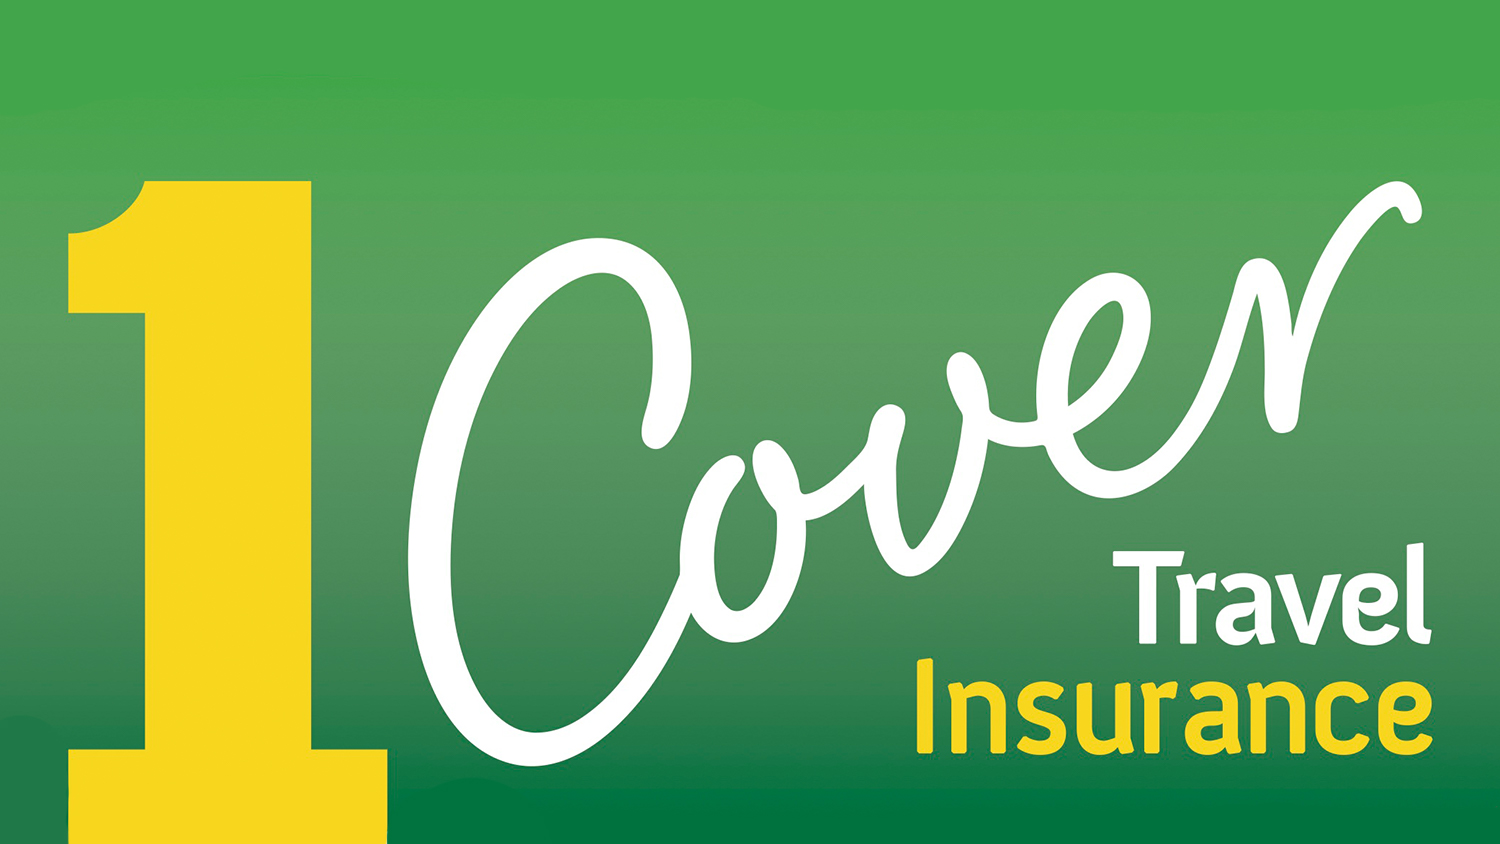 xcover travel insurance phone number